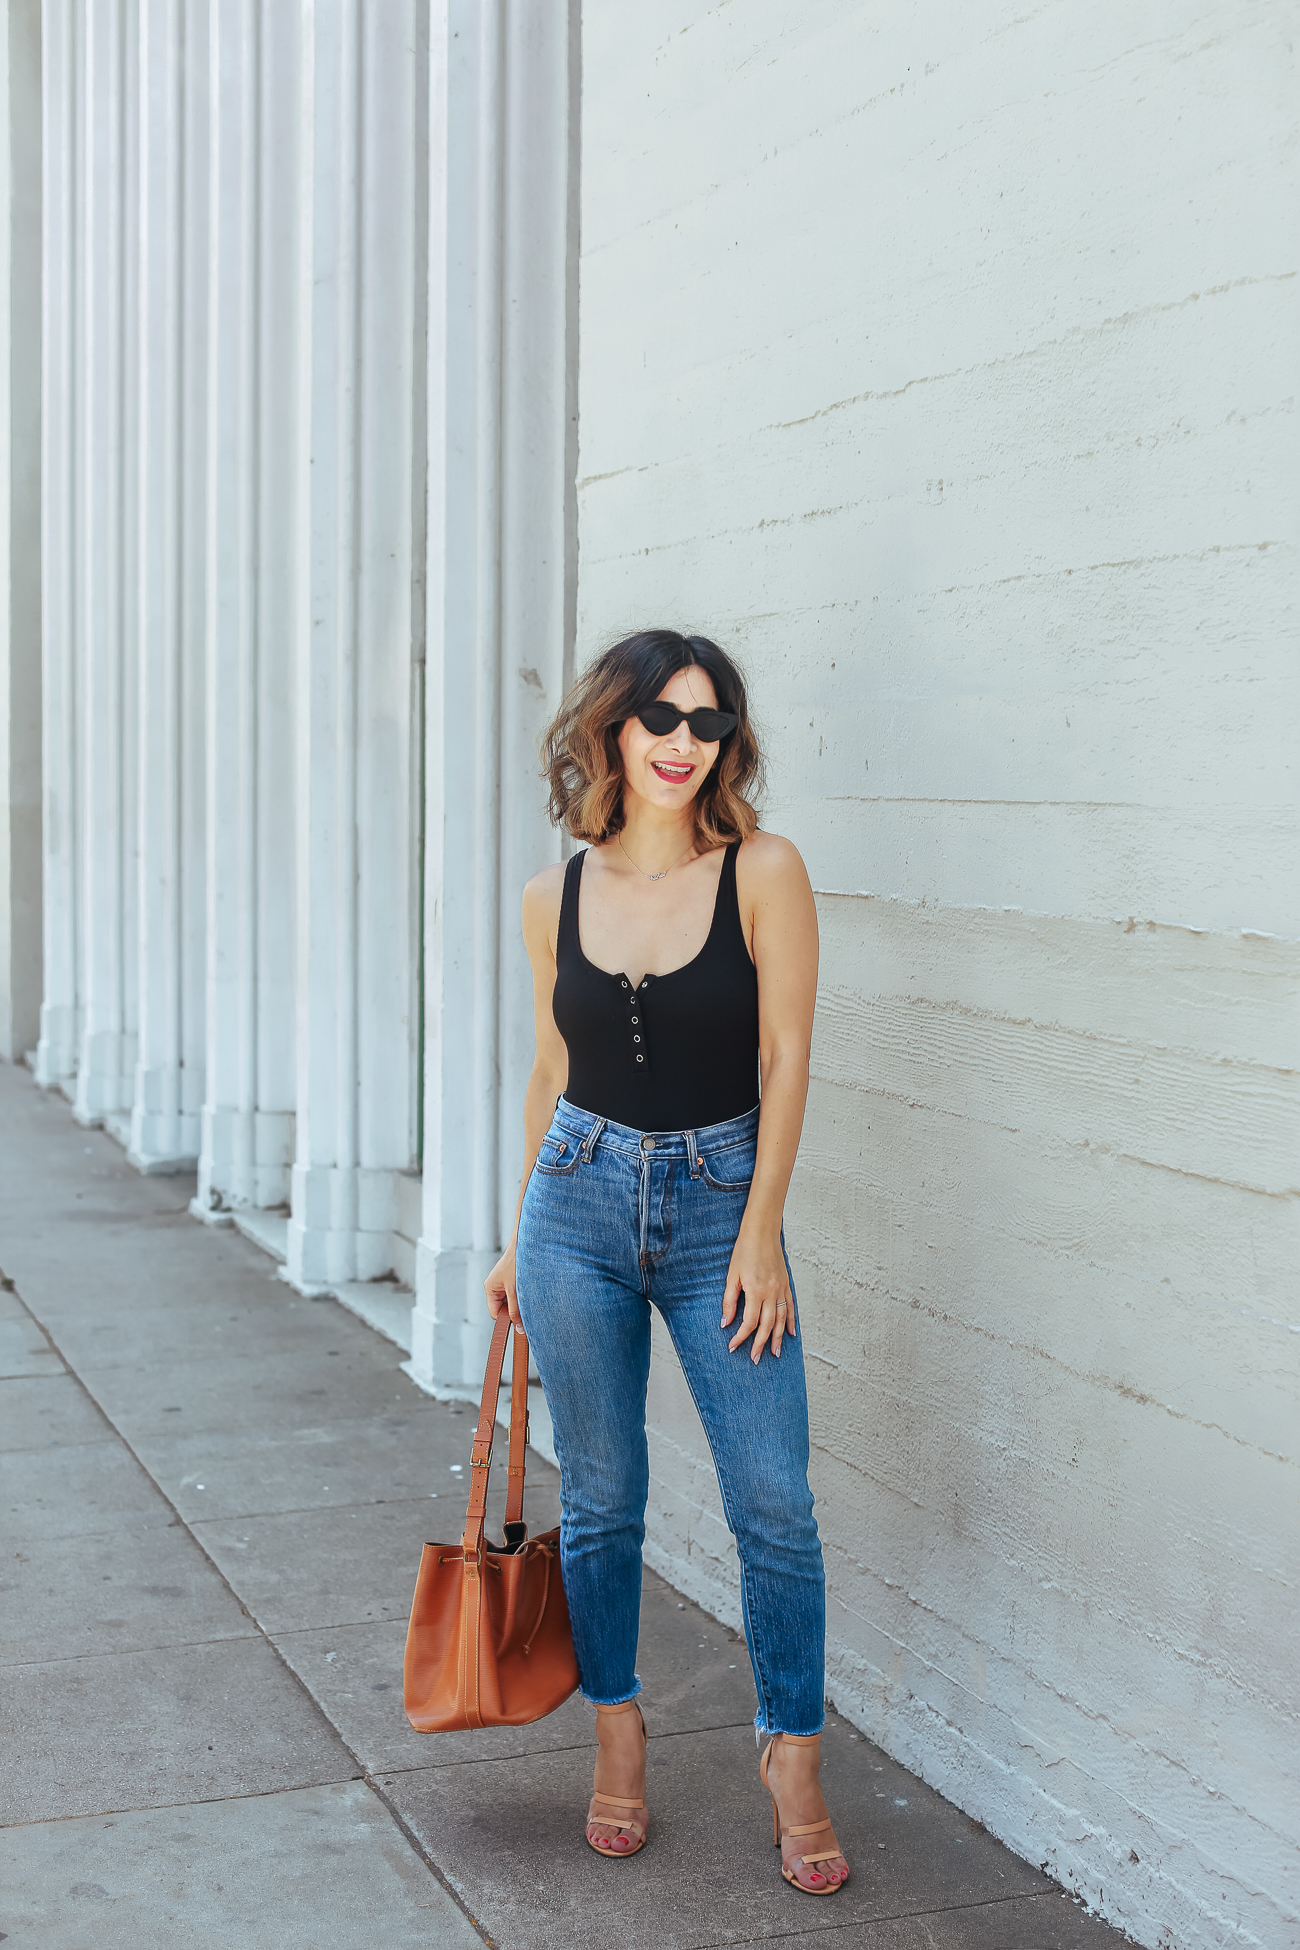 Ba(e)sic is Best - How to Style a Bodysuit and Levis for a go-to look